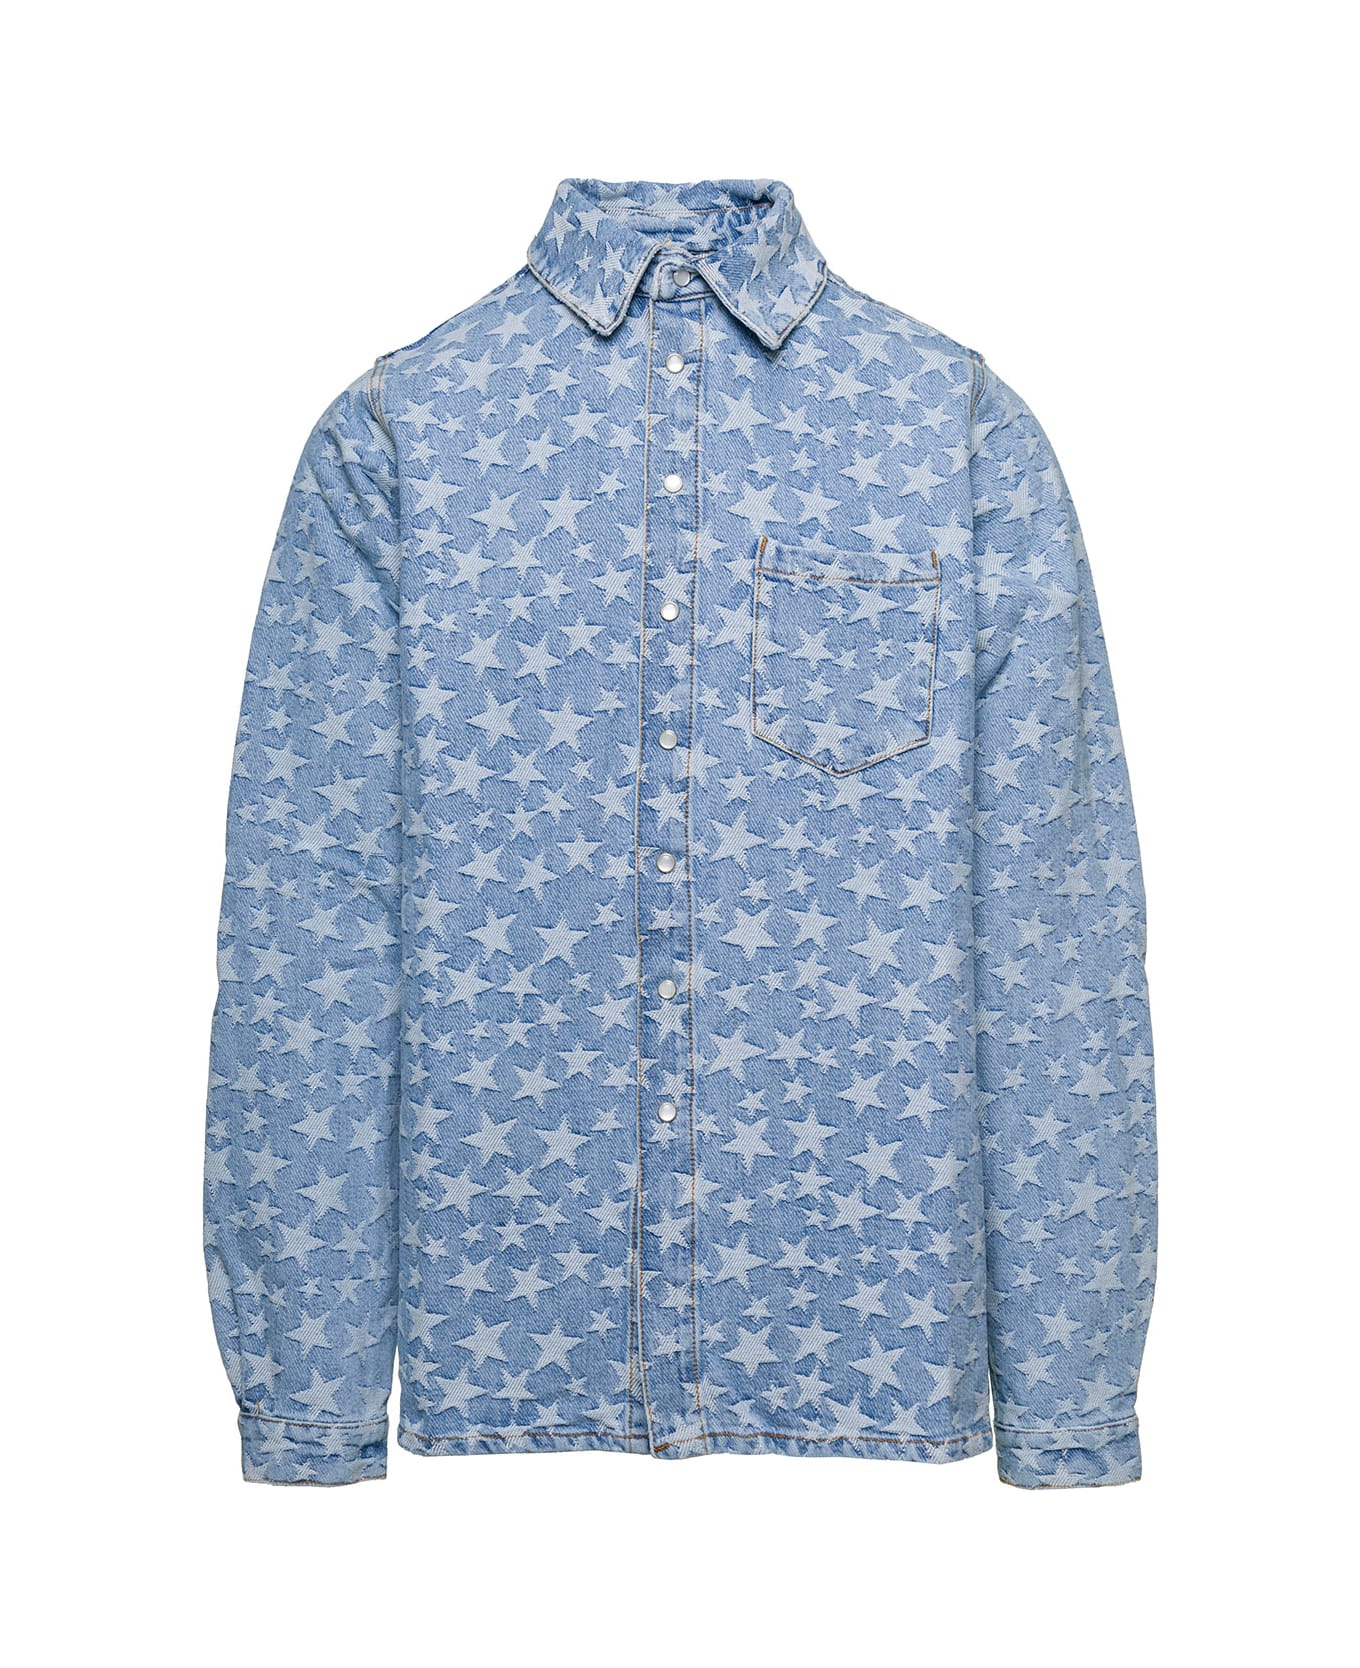 ERL Light Blue Long Sleeve Shirt With All-over Star Print In Cotton Denim - Light blue